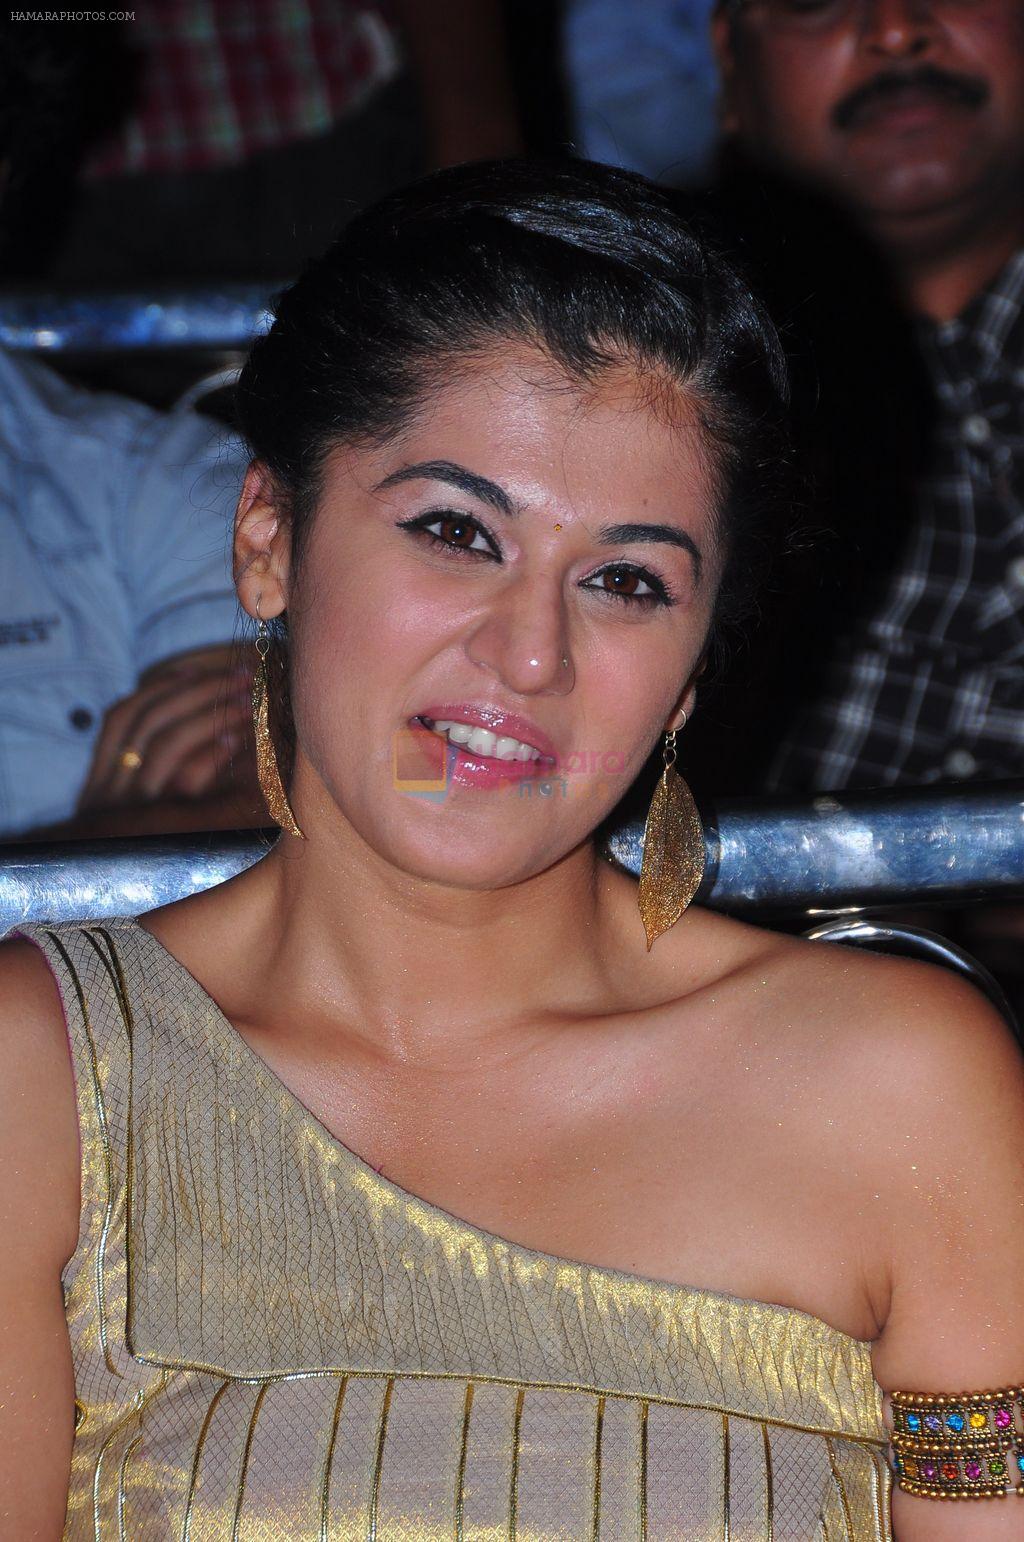 Tapasee Pannu attends Mogudu Movie Audio Launch on 11th October 2011